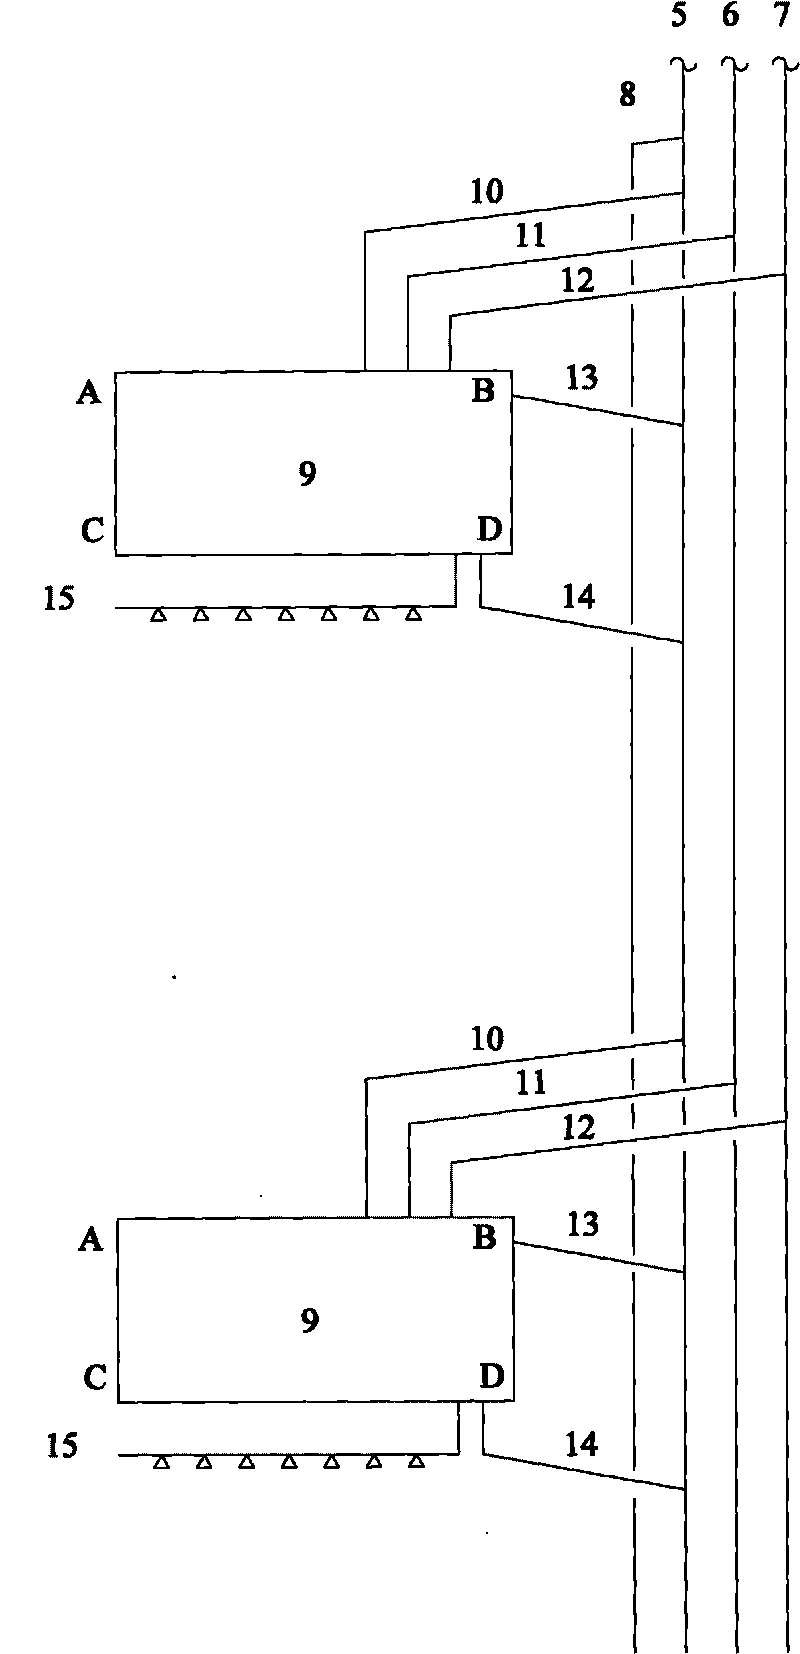 Box-type double-layer curtain wall using water storage tank for evaporative cooling